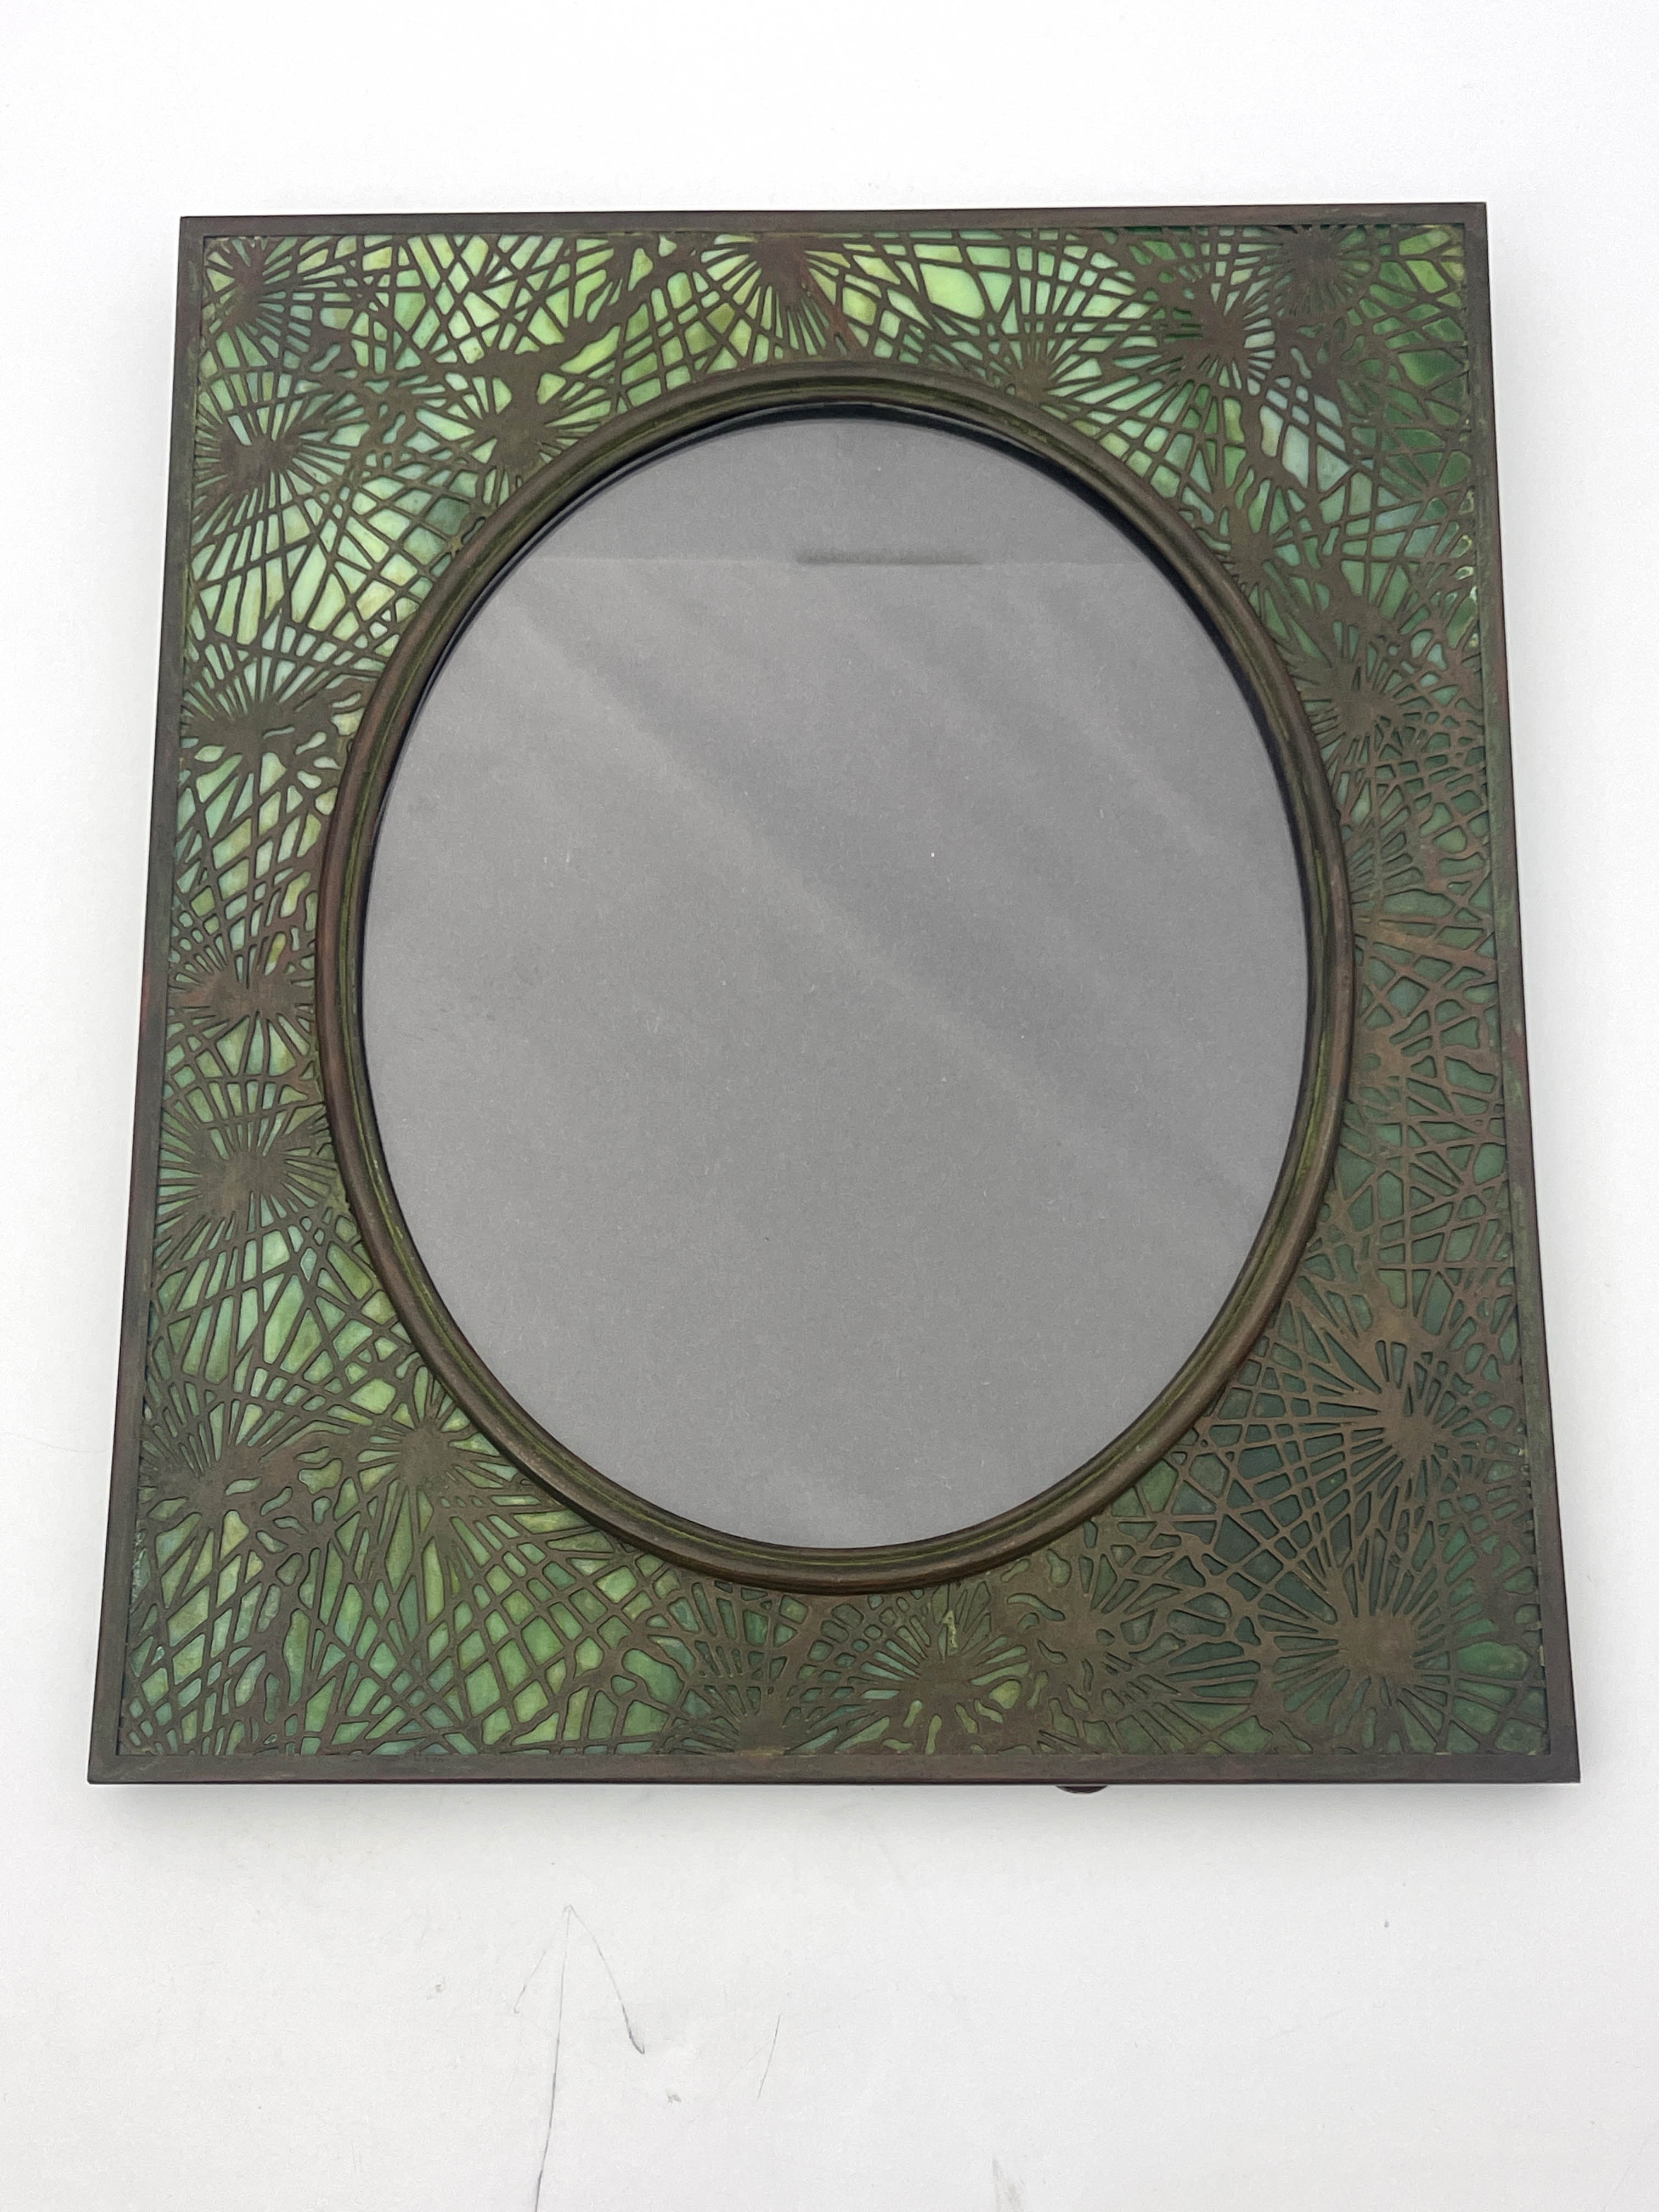 Tiffany Studios, an American Art Nouveau bronze and stained glass photo frame - Image 5 of 5